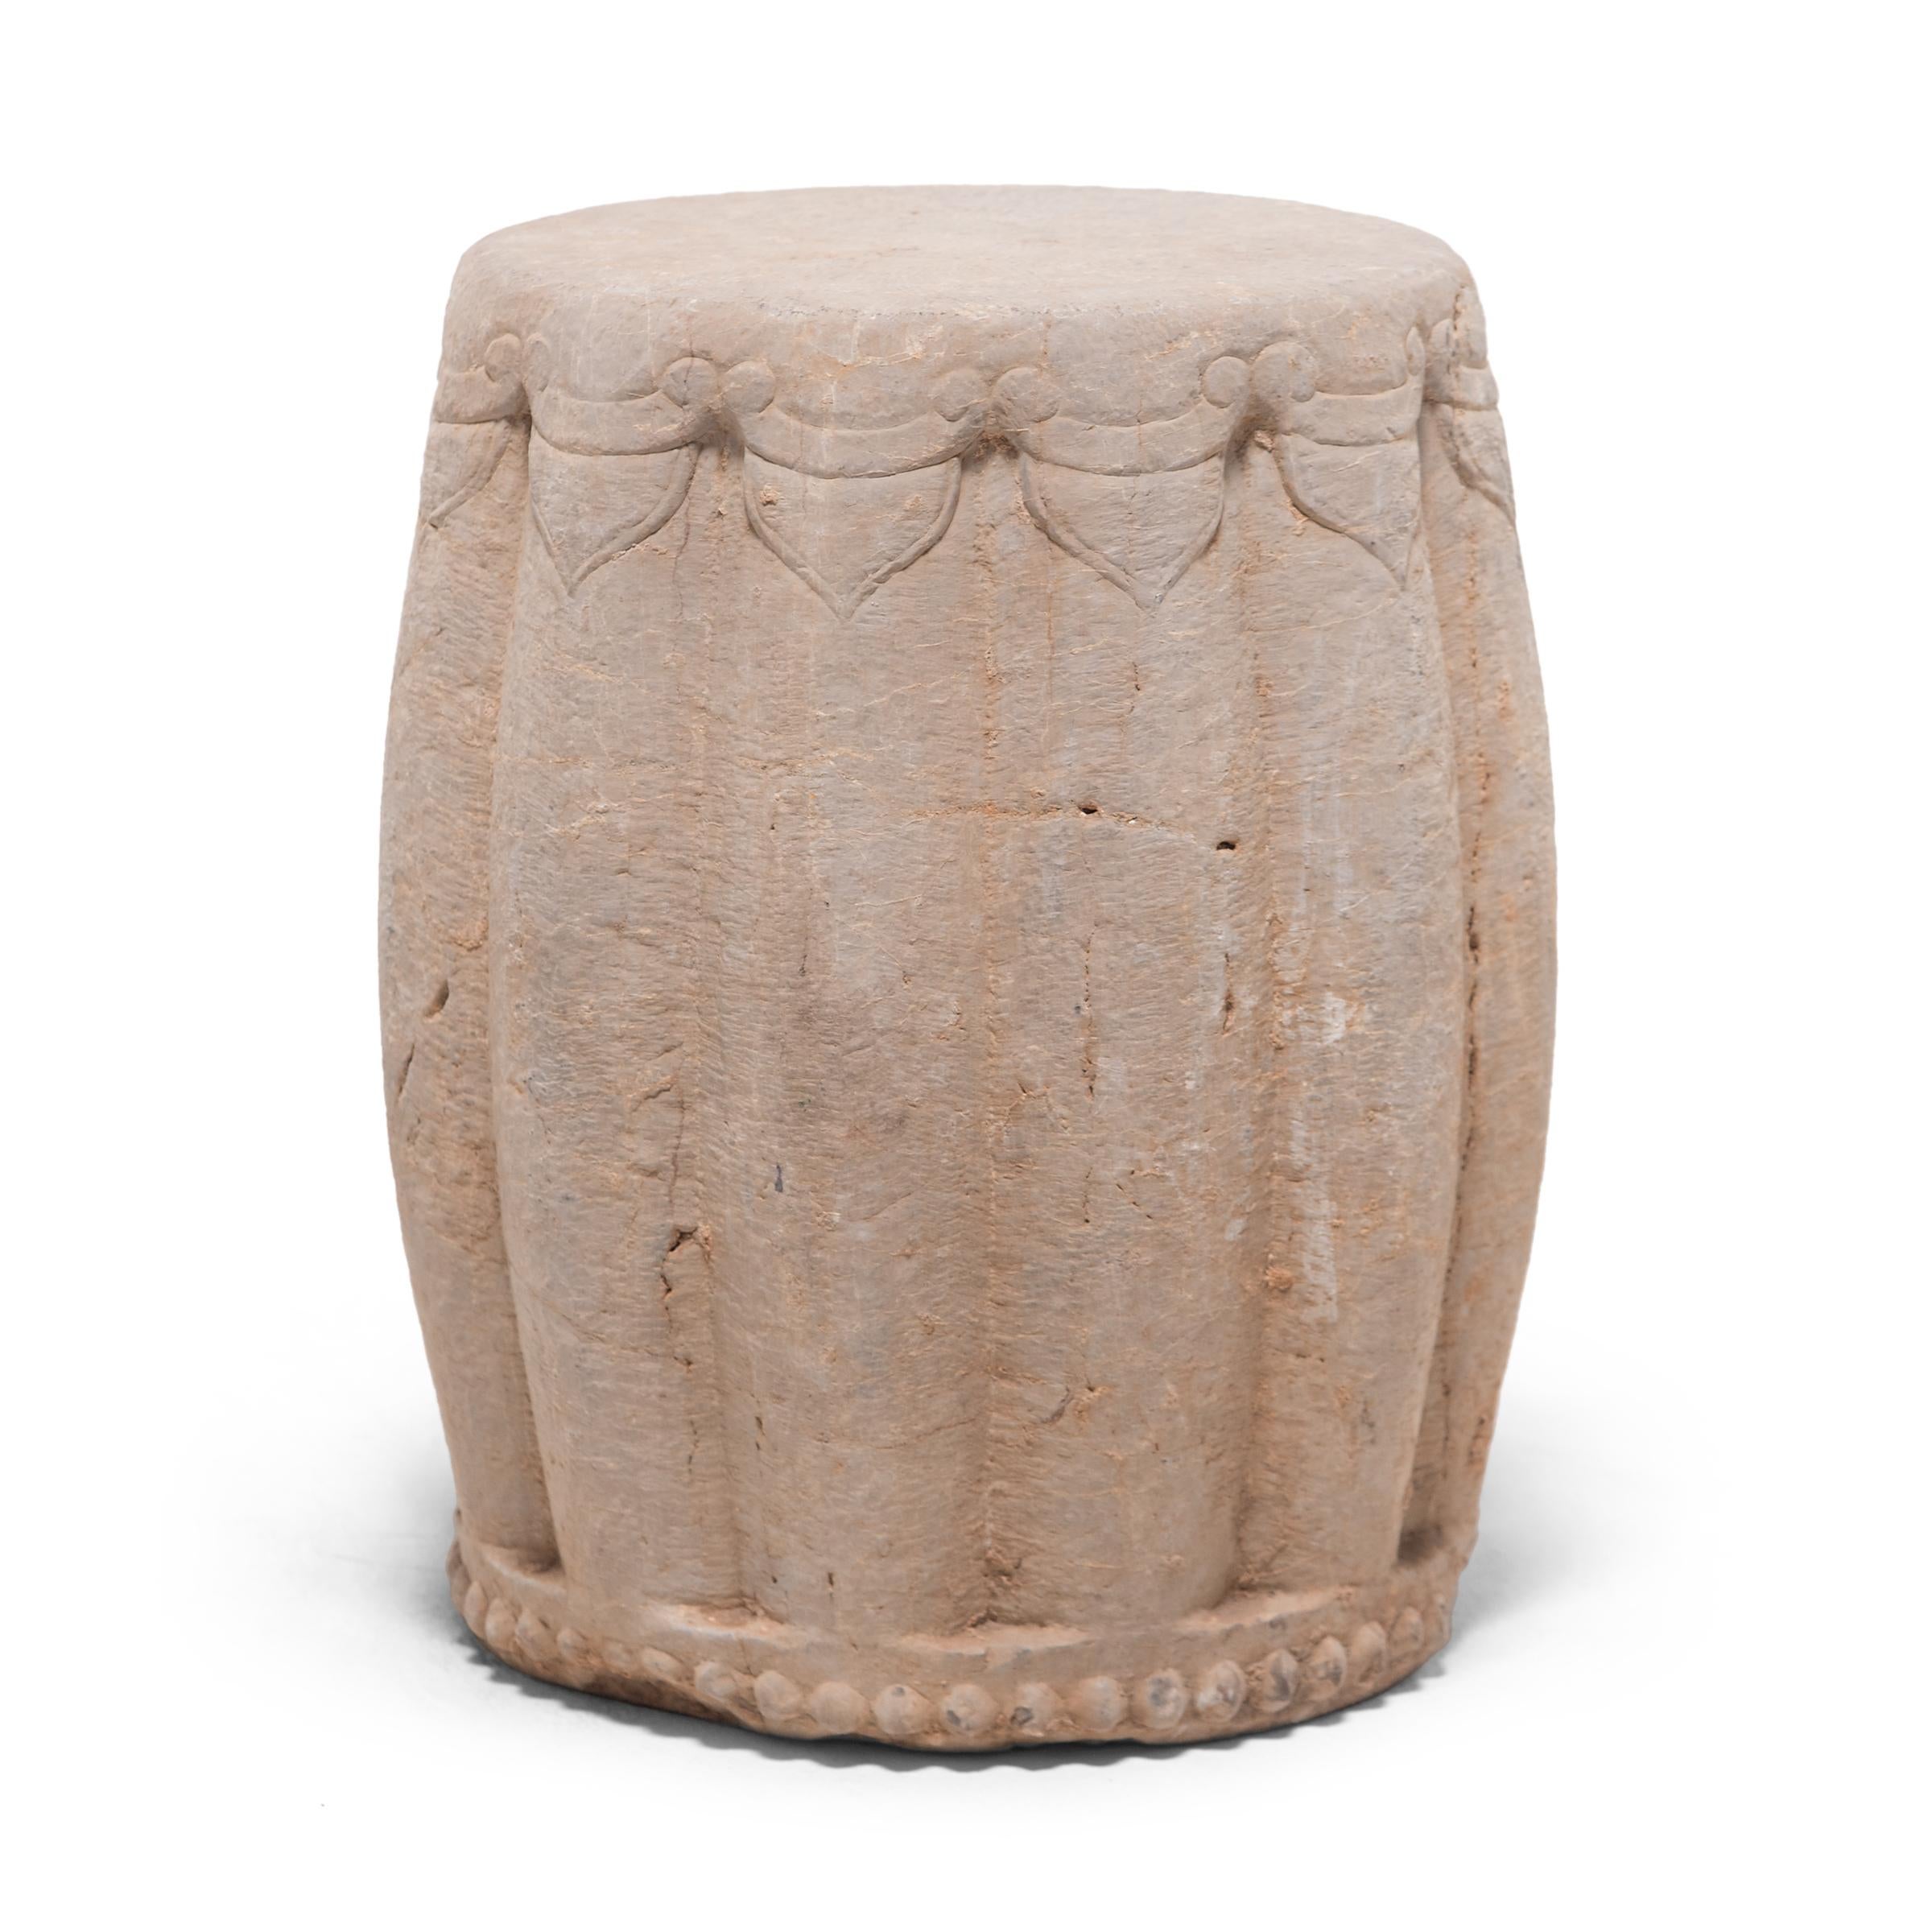 Carved from a solid block of limestone, this drum-form garden stool began its life in China's Shanxi province in the early 20th century. Ribbed and rounded, the stool suggests a melon, an ancient Chinese symbol of perpetuity. The seat is framed by a